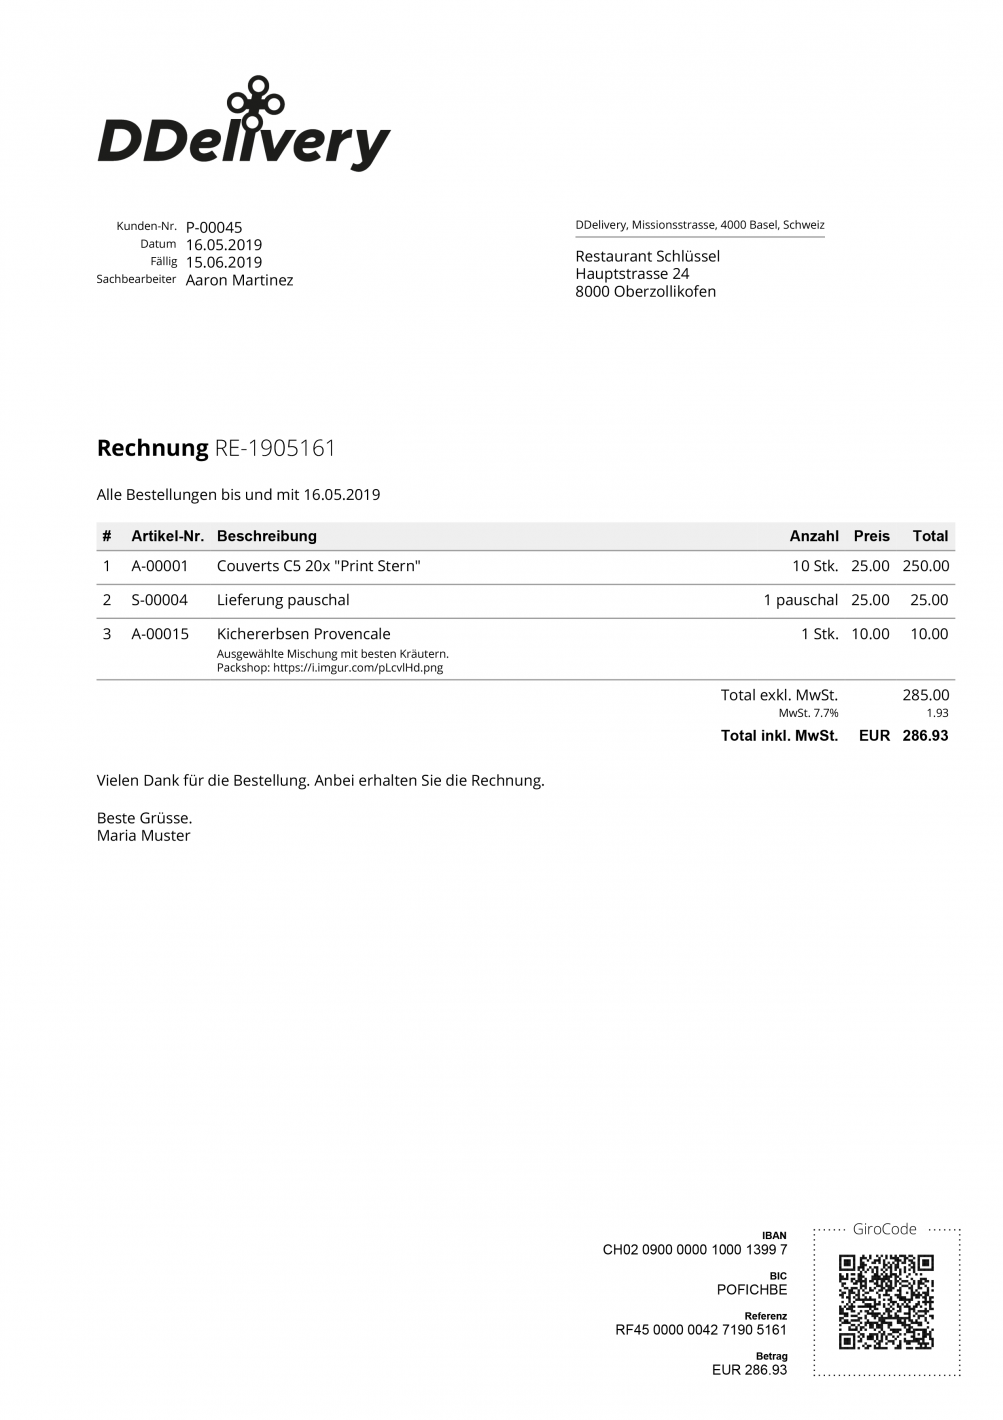 Finished European QR invoice with Girocode